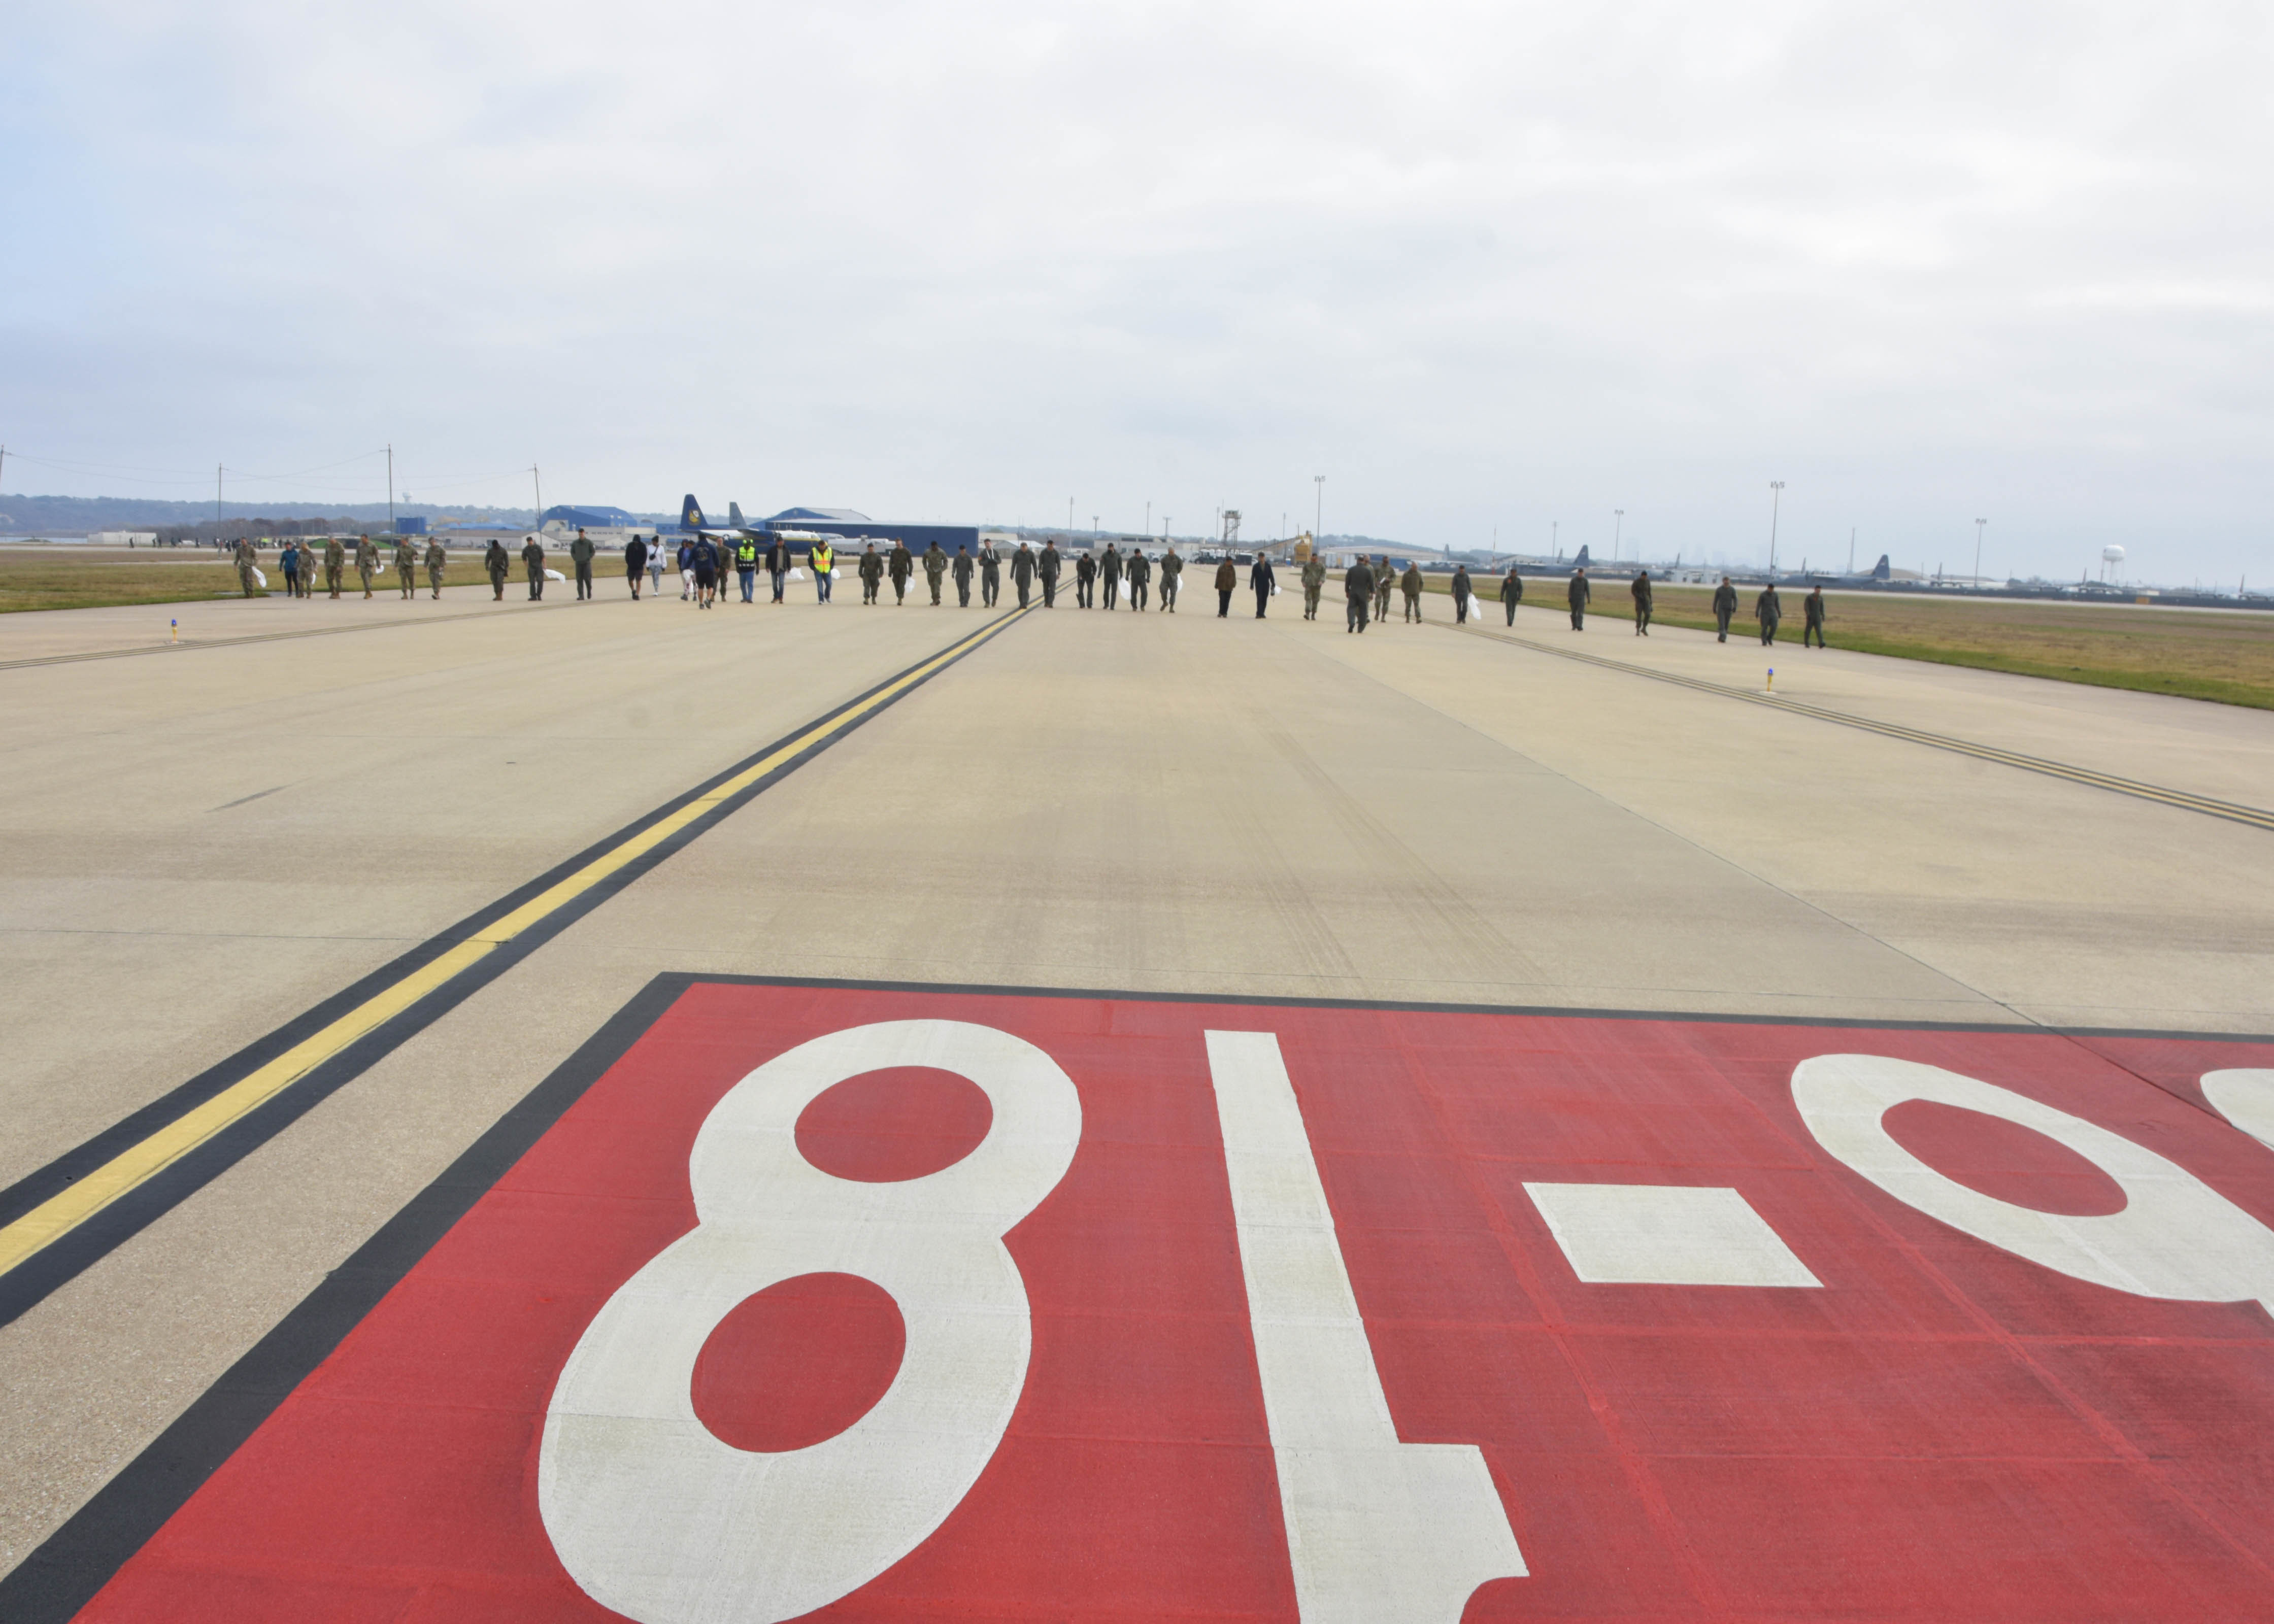 NAS JRB Fort Worth Completes 4.8 Million Runway Project > United